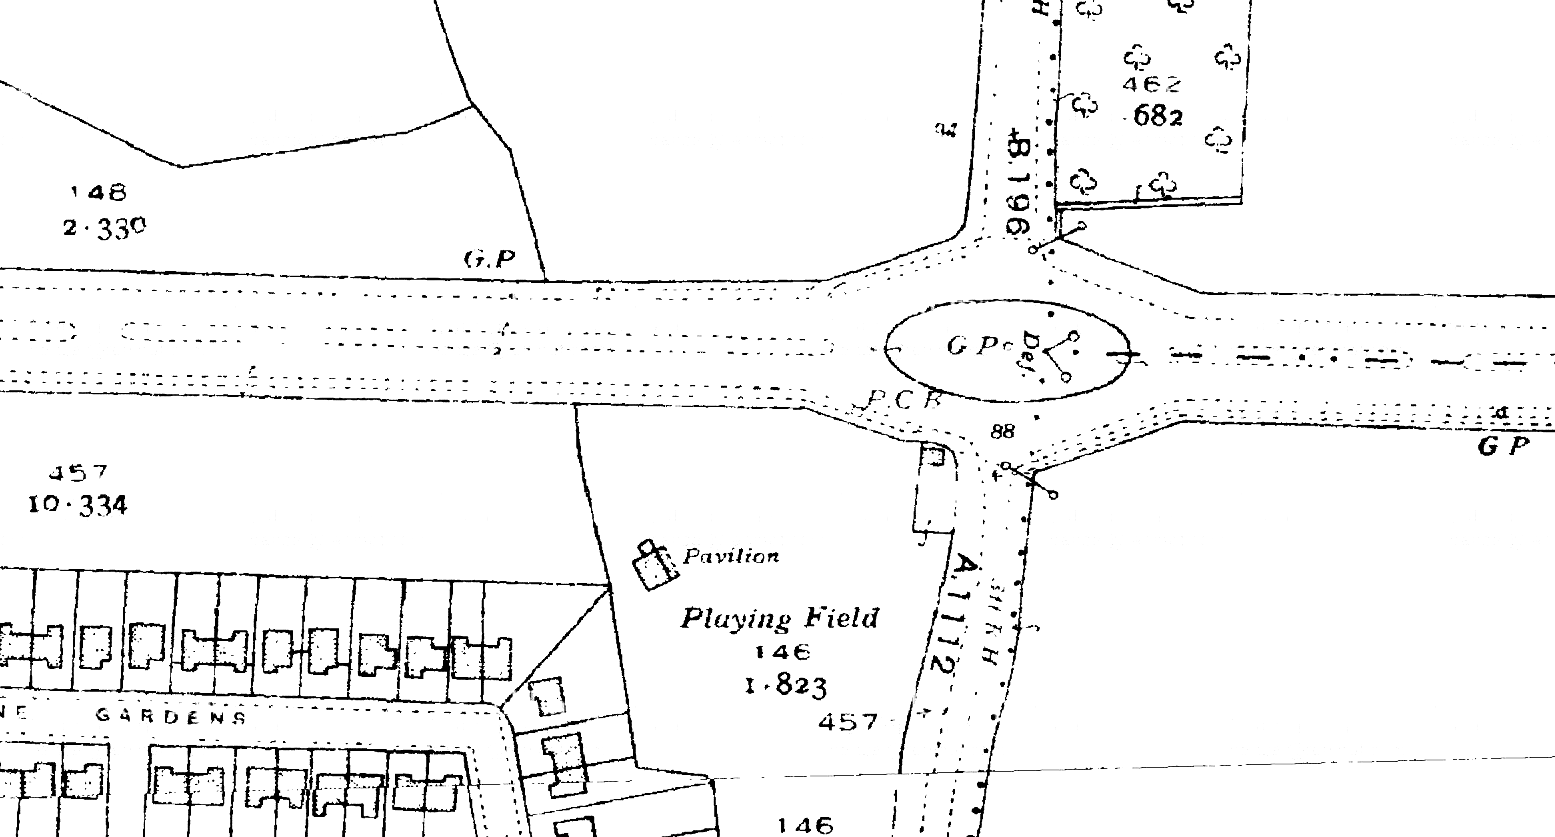 K19--Moby Dick Roundabout, Chadwell Heath Box--1938-1939 OS Map Extract 1-2500.png